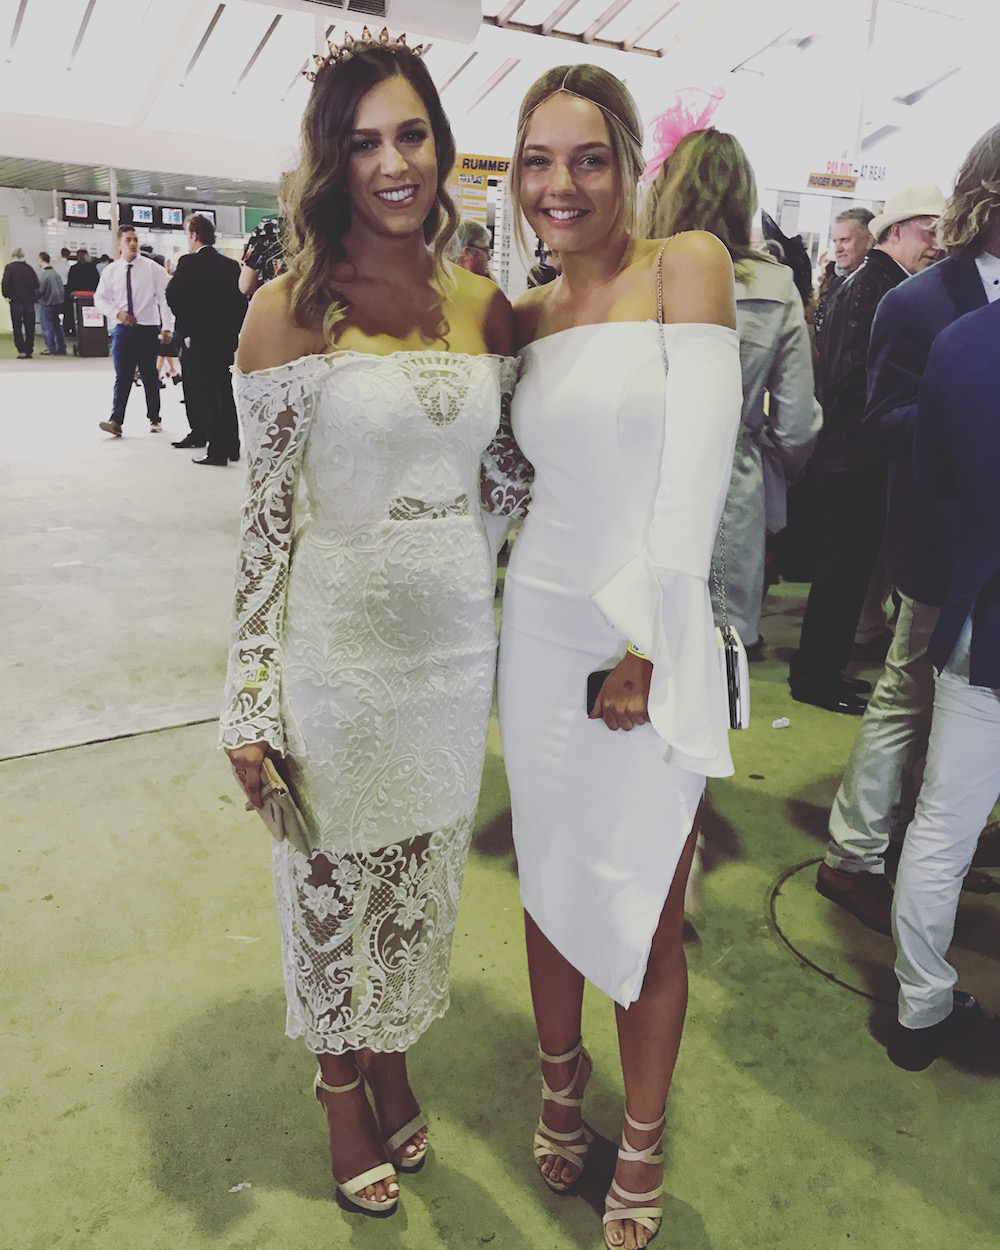 Georgia Wood and Jemma Griffiths were the belles of the betting ring. Photo: Charlotte Harper